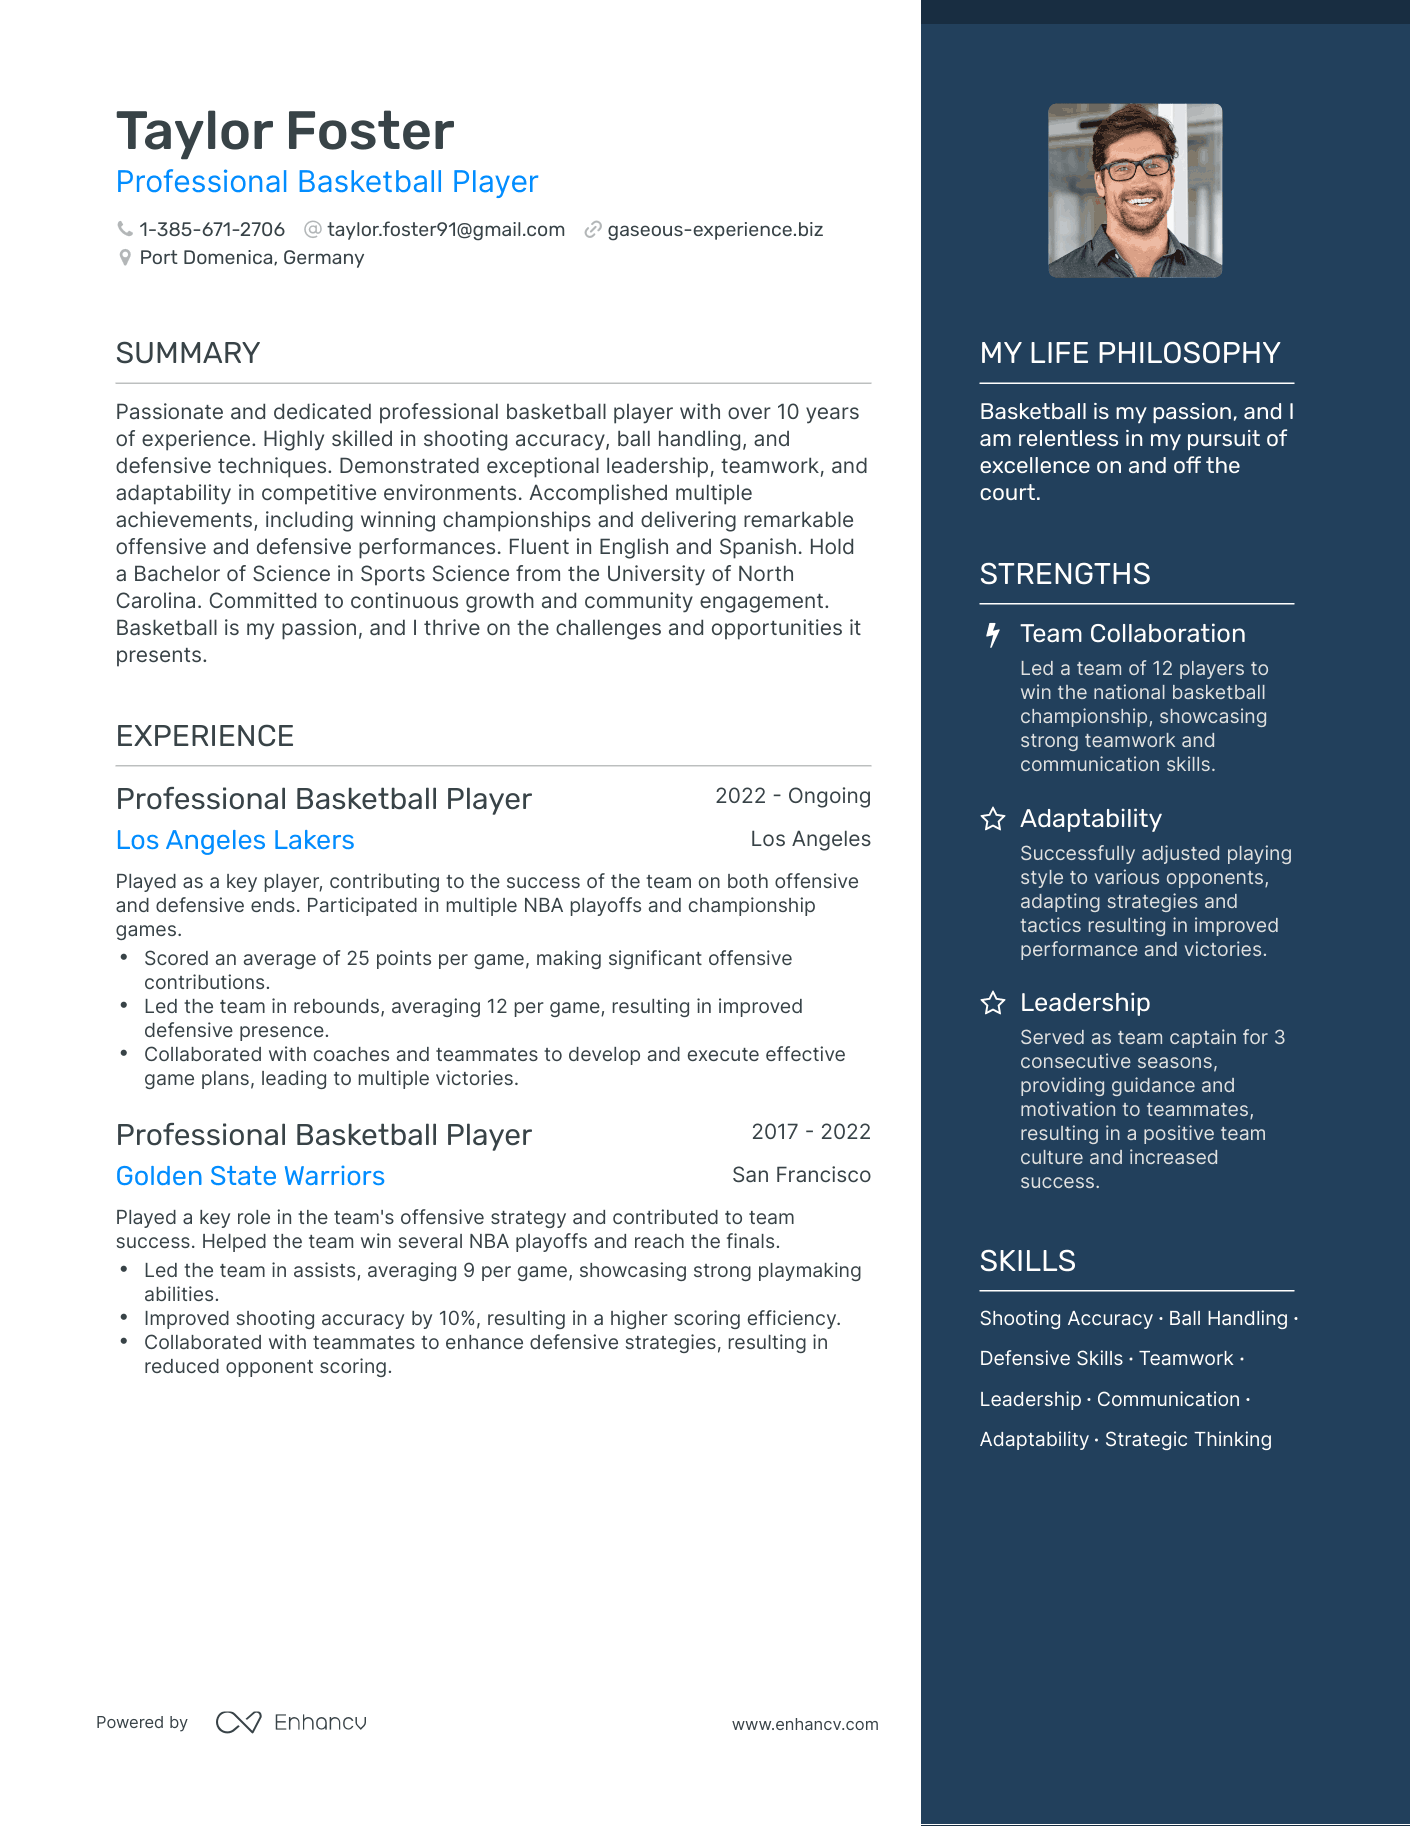 Professional Basketball Player resume example